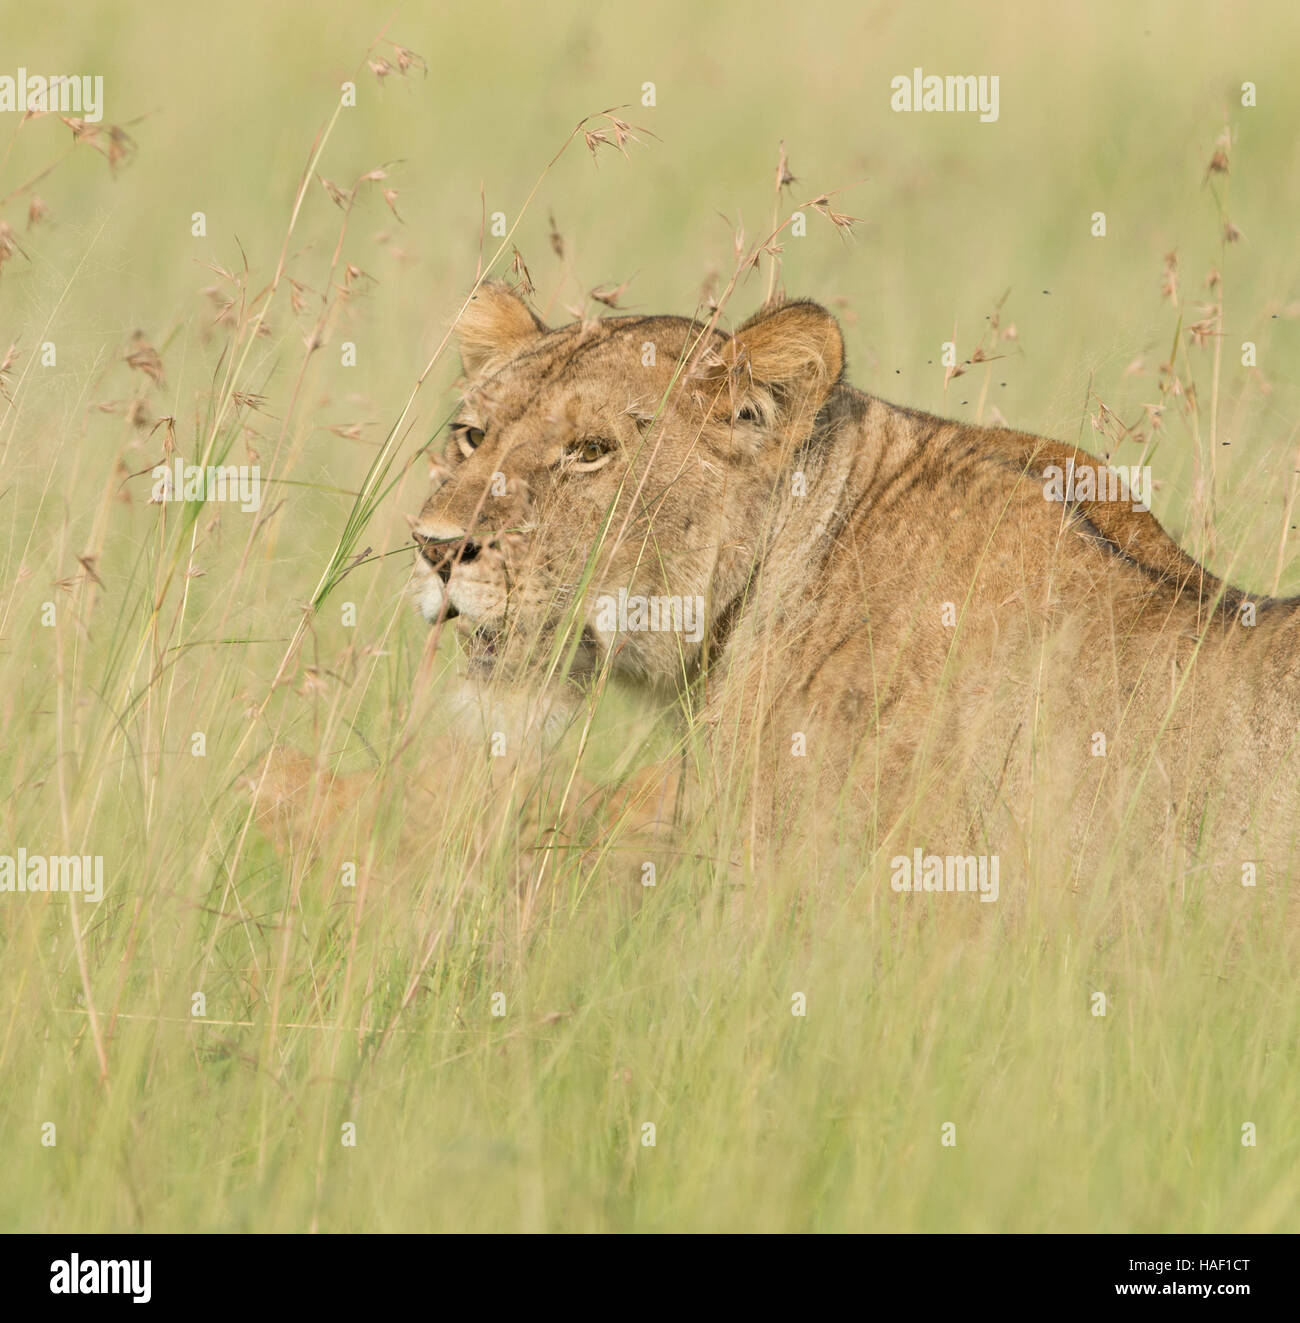 Lion in Tall Grass Serengeti National Park Stock Photo